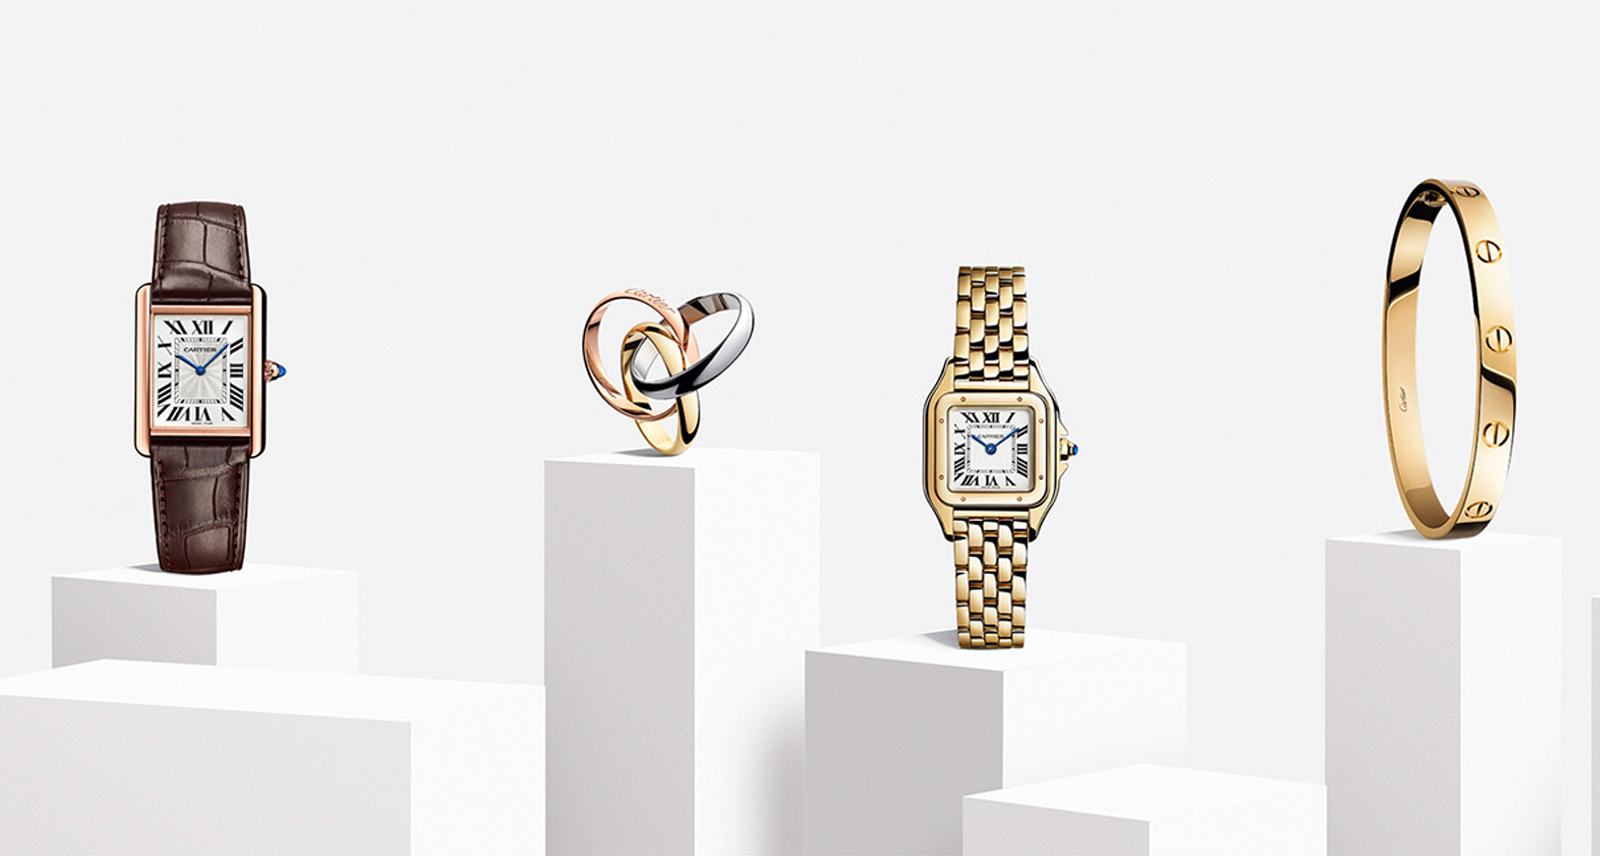 Timeless, Elegant, and Innovative: The Story of Seven Iconic Designs by Cartier